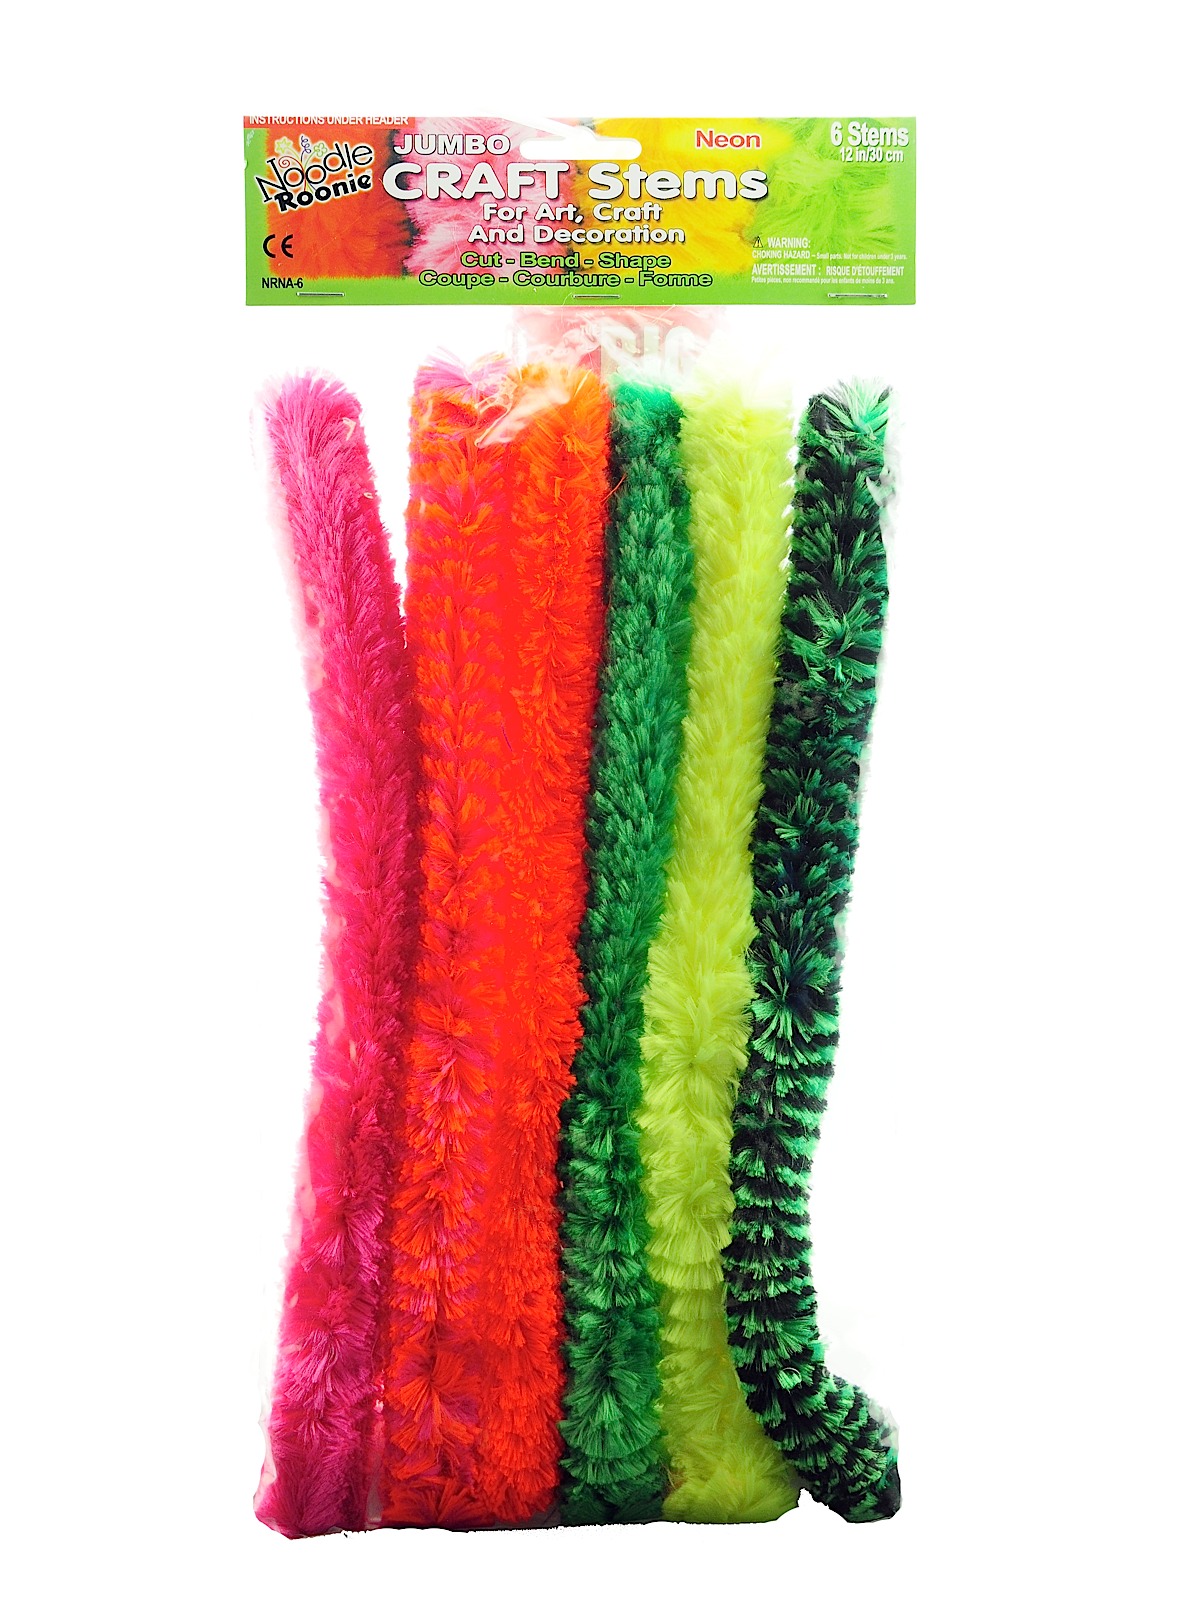 Noodle Roonie 12 In. Craft Stems Neon Pack Of 6